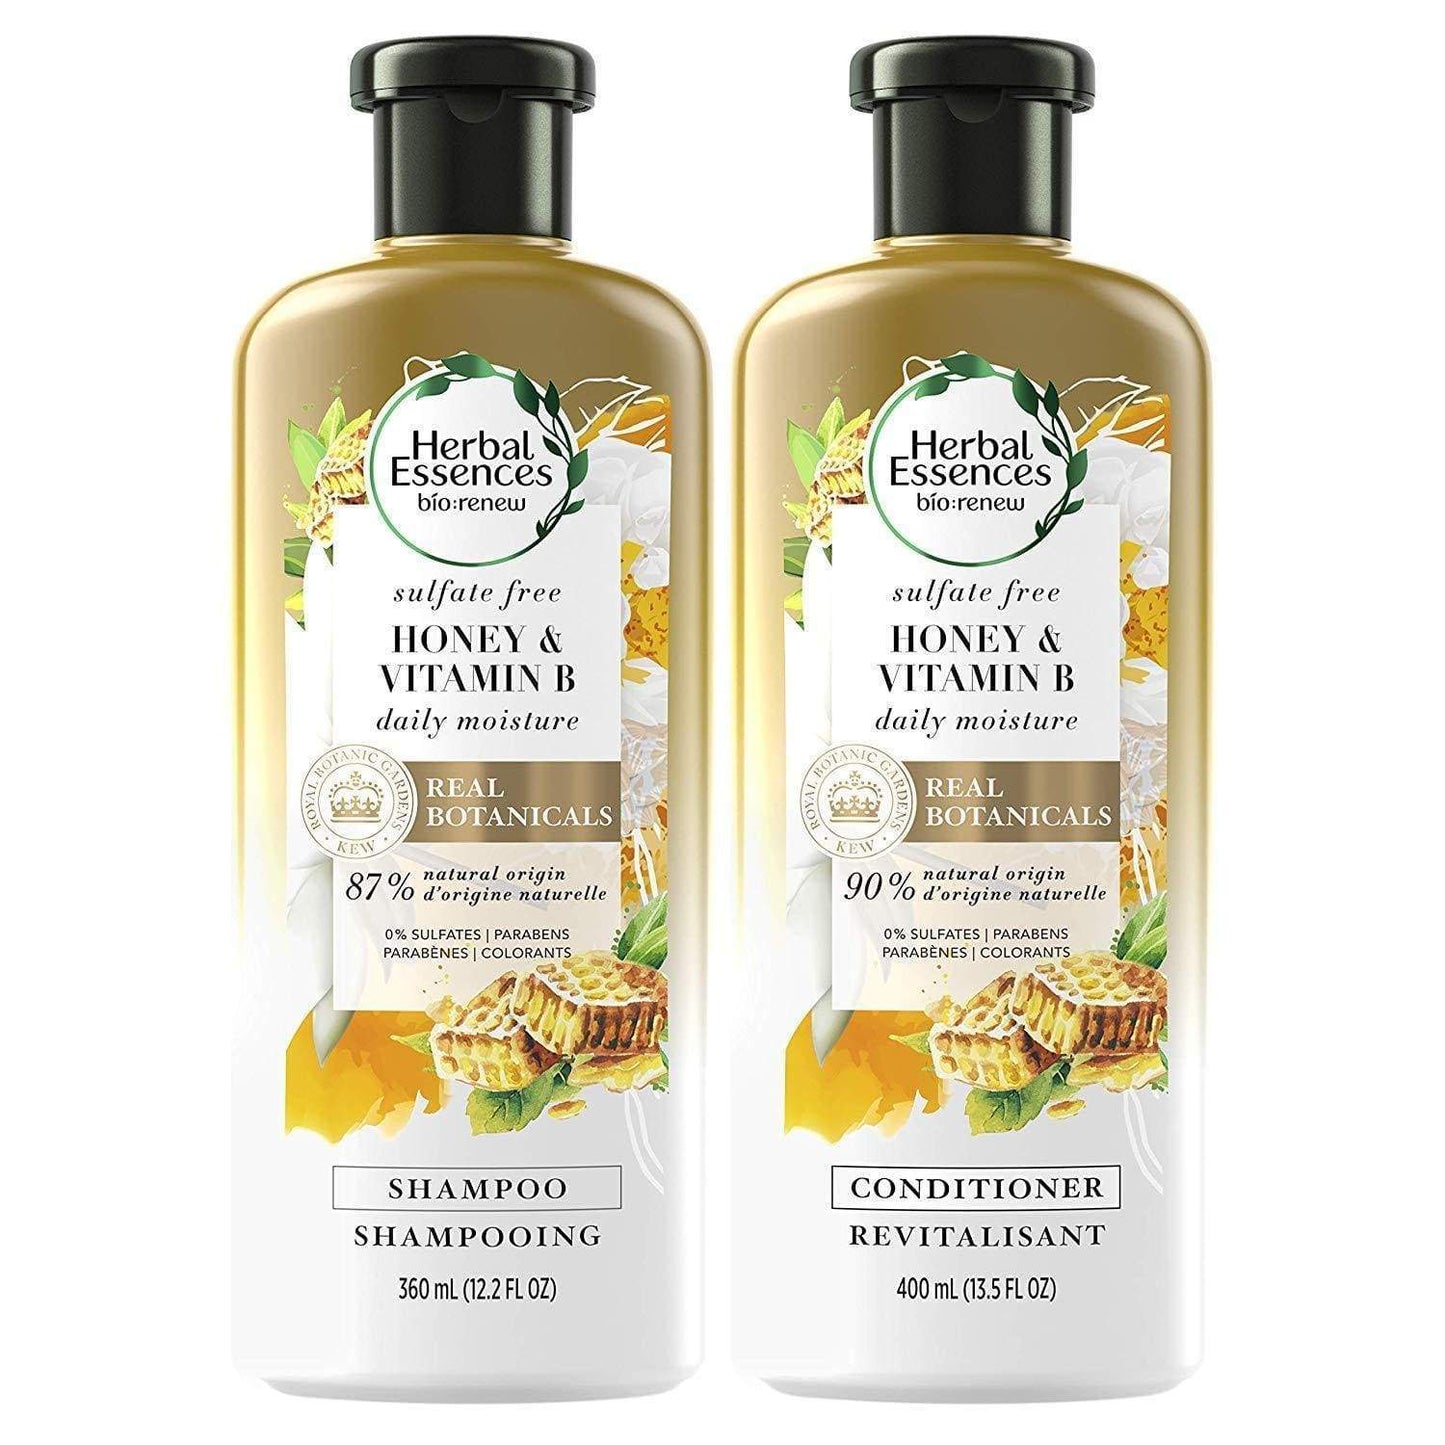 Herbal Essences, Sulfate Free Shampoo and Conditioner Kit Minoustore